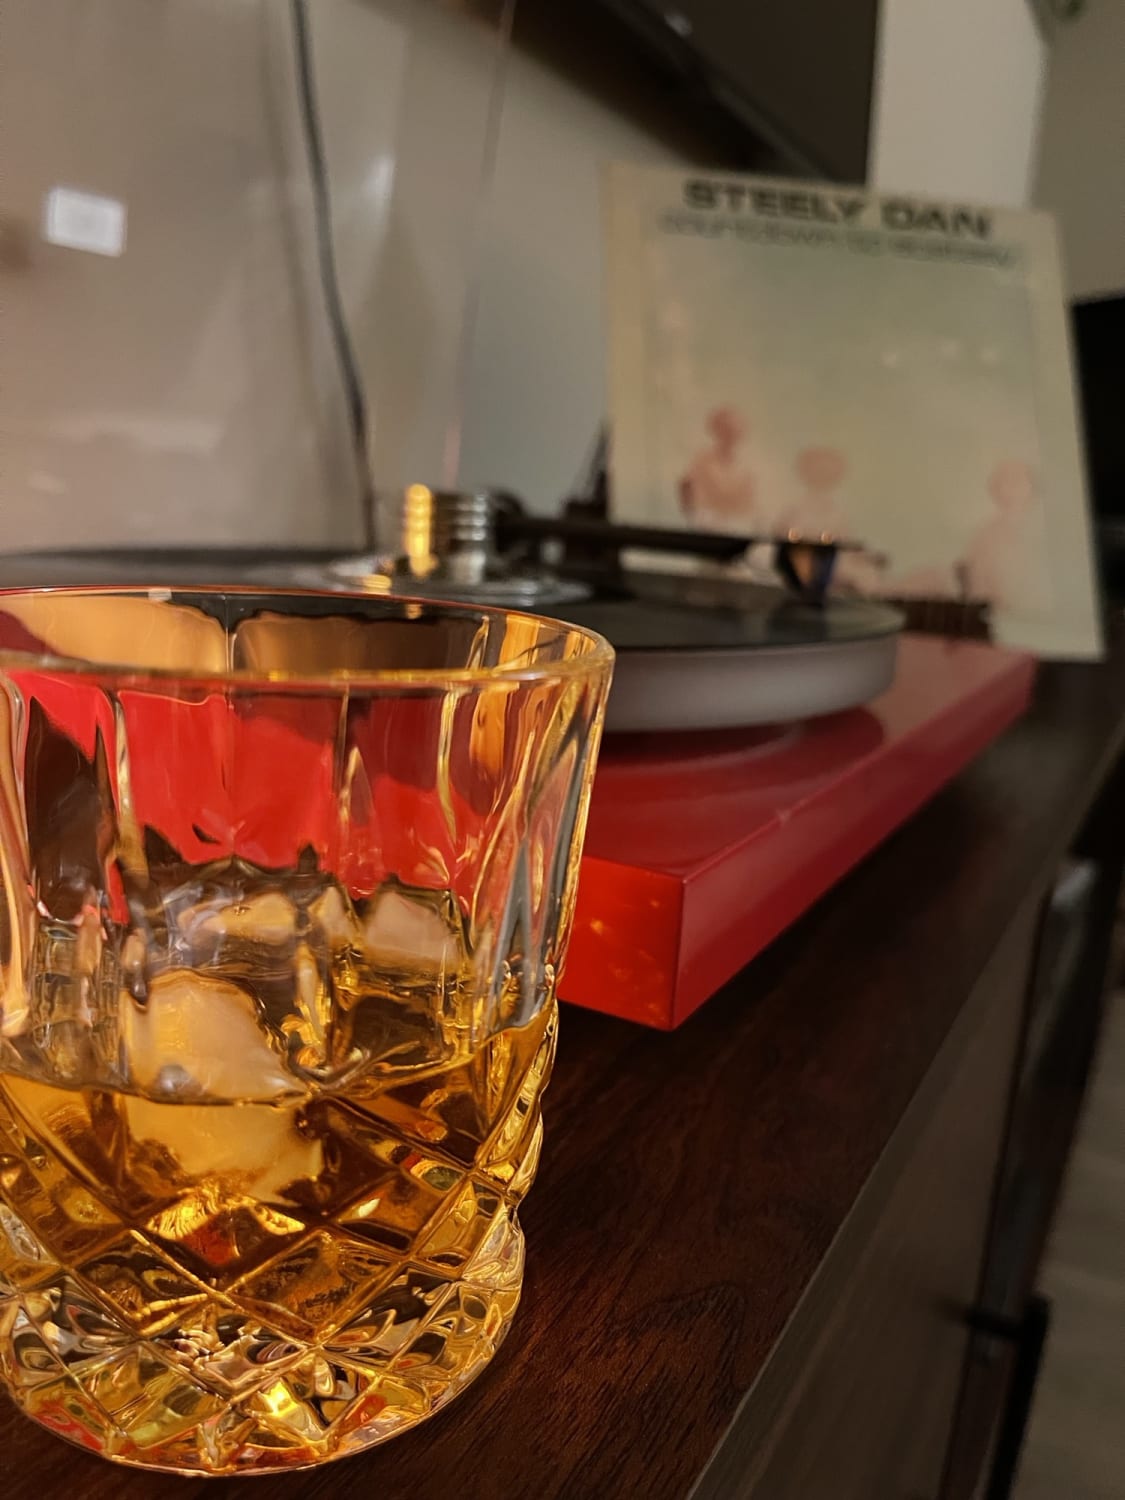 Steely Dan and scotch, the perfect combo.